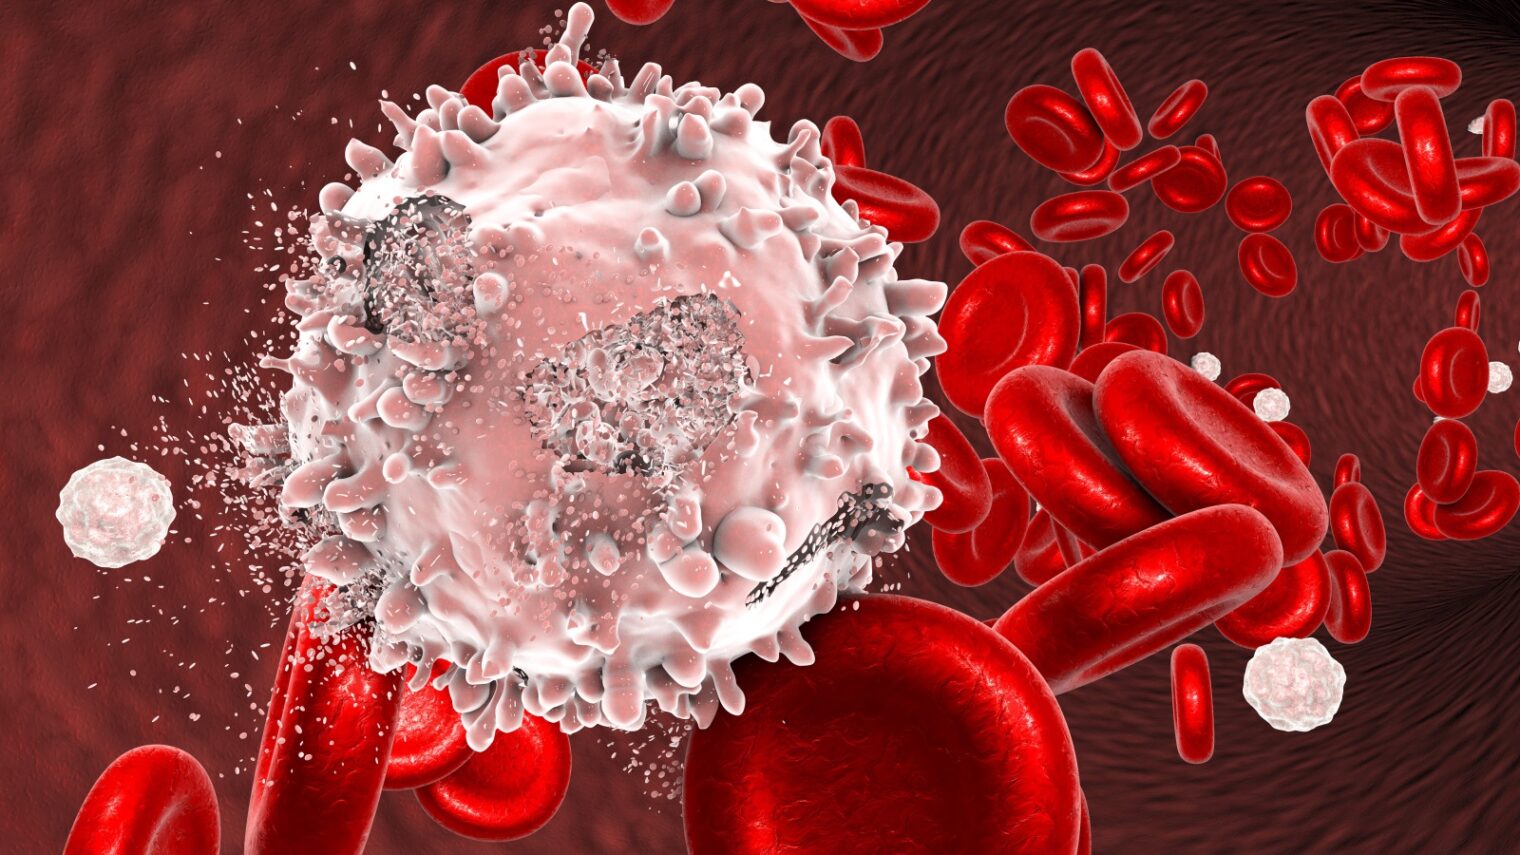 3D illustration showing the destruction of a leukemia cell by Kateryna Kon/Shutterstock.com